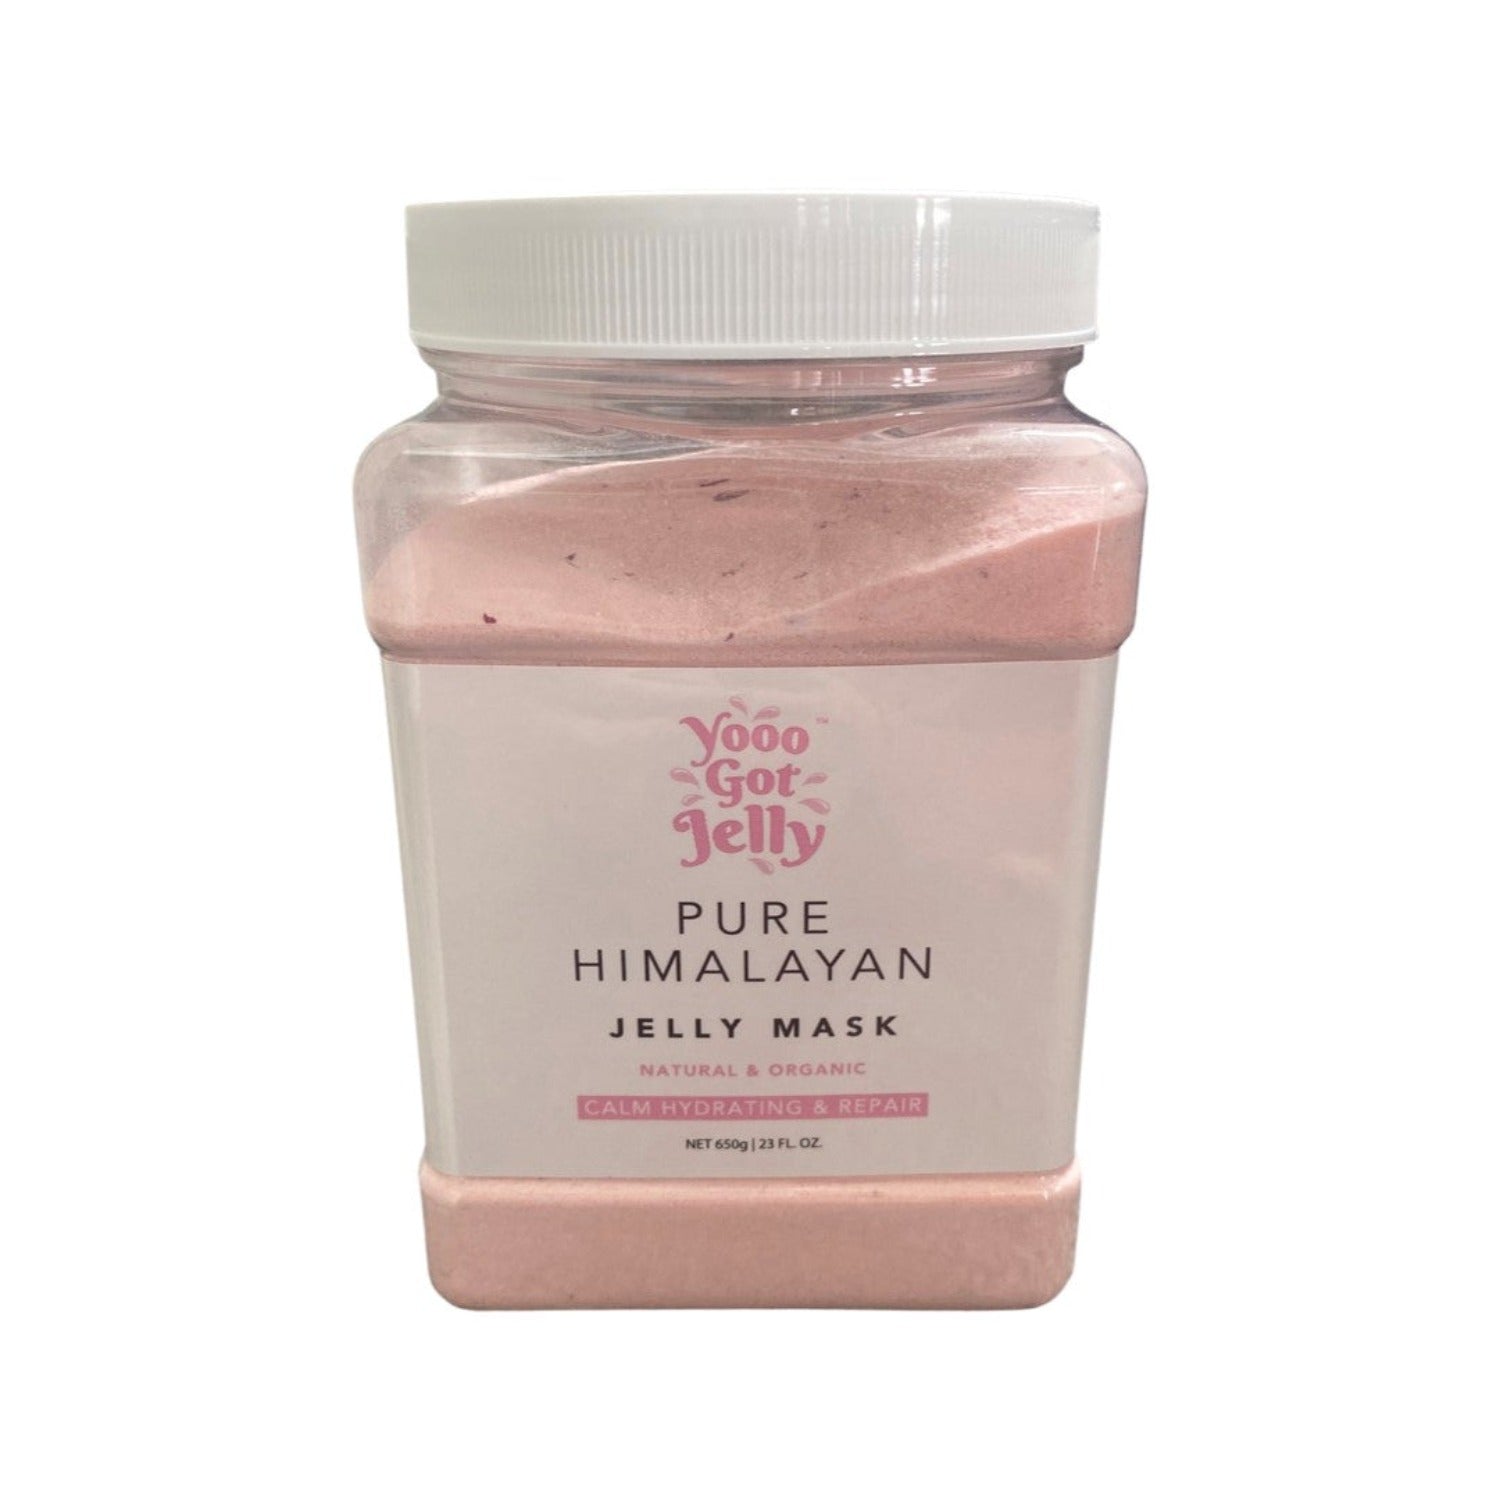 PURE HIMALAYAN JELLY MASK - Calming and Hydrating